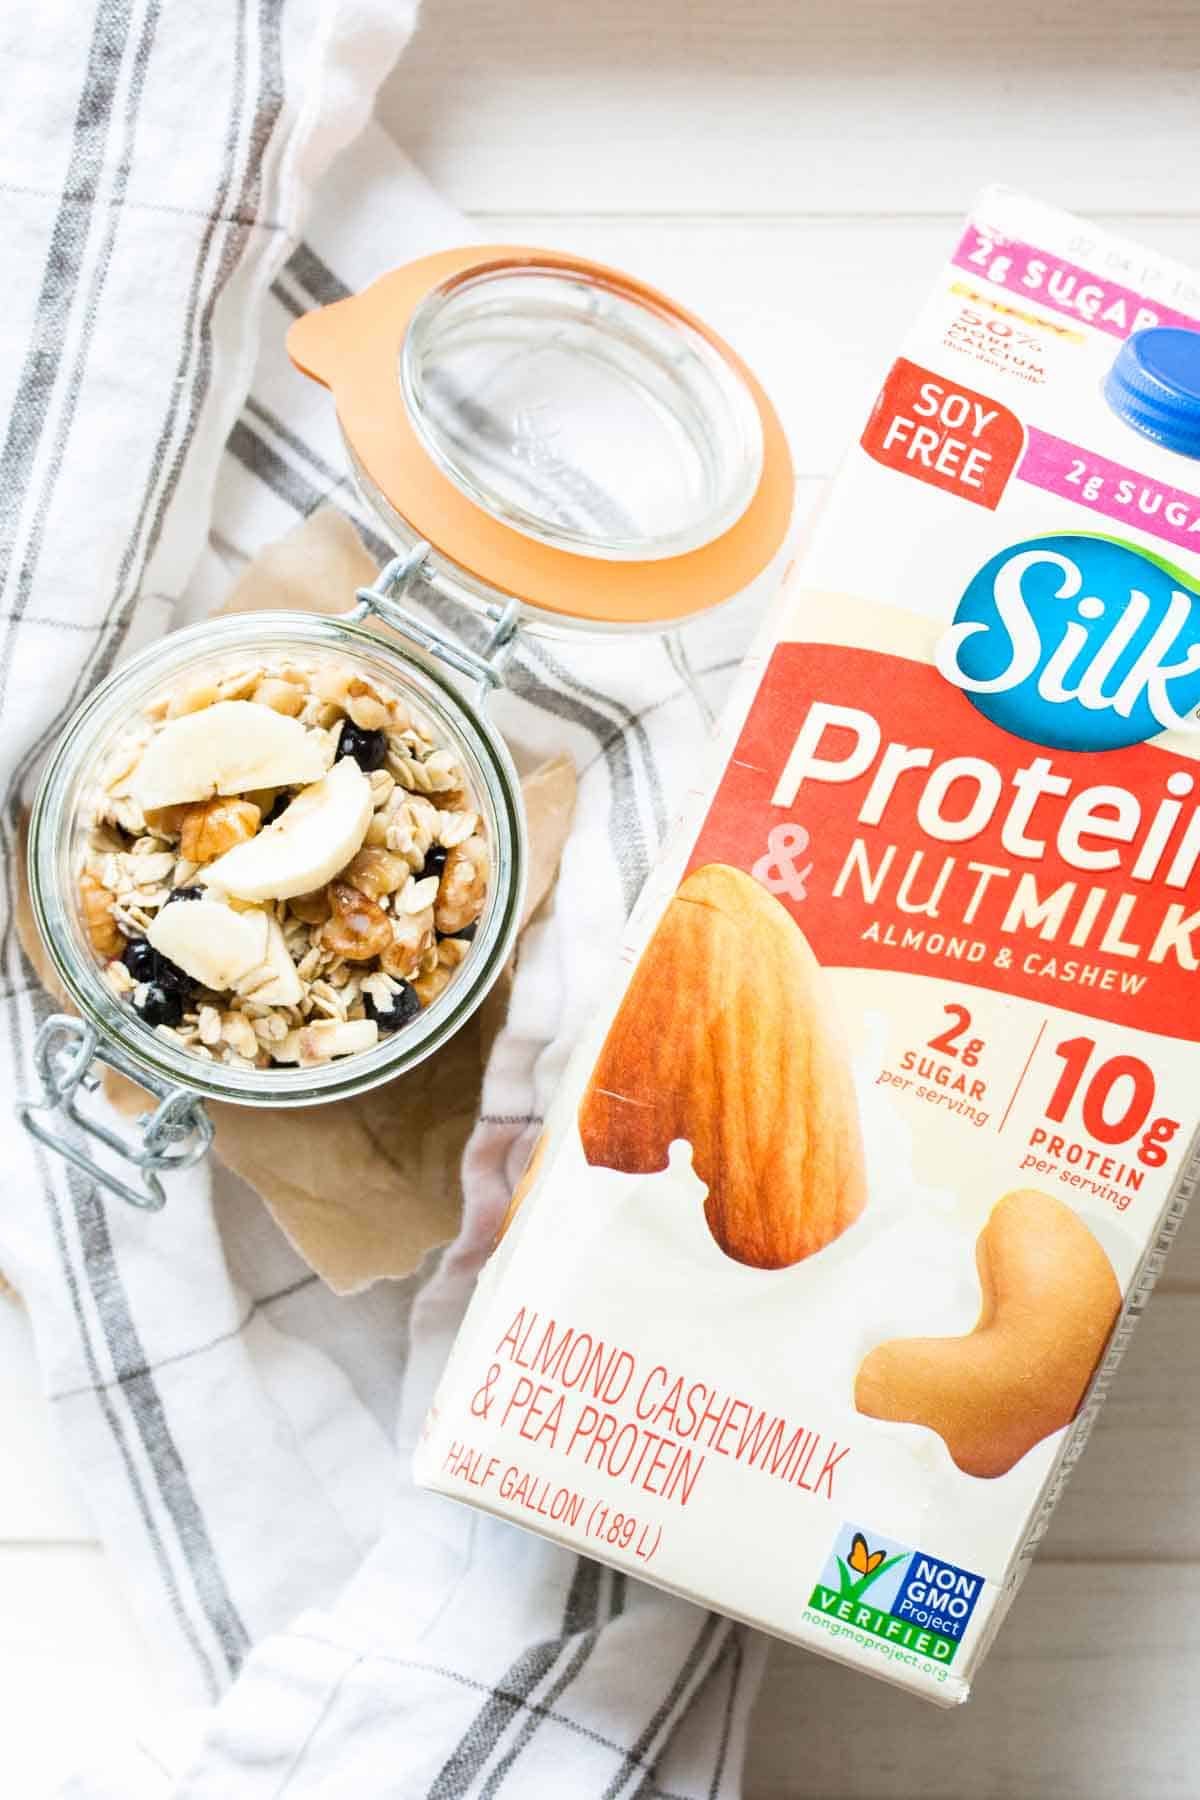 A carton of silk nutmilk laying flat on a wooden surface with a jar of cereal next to it